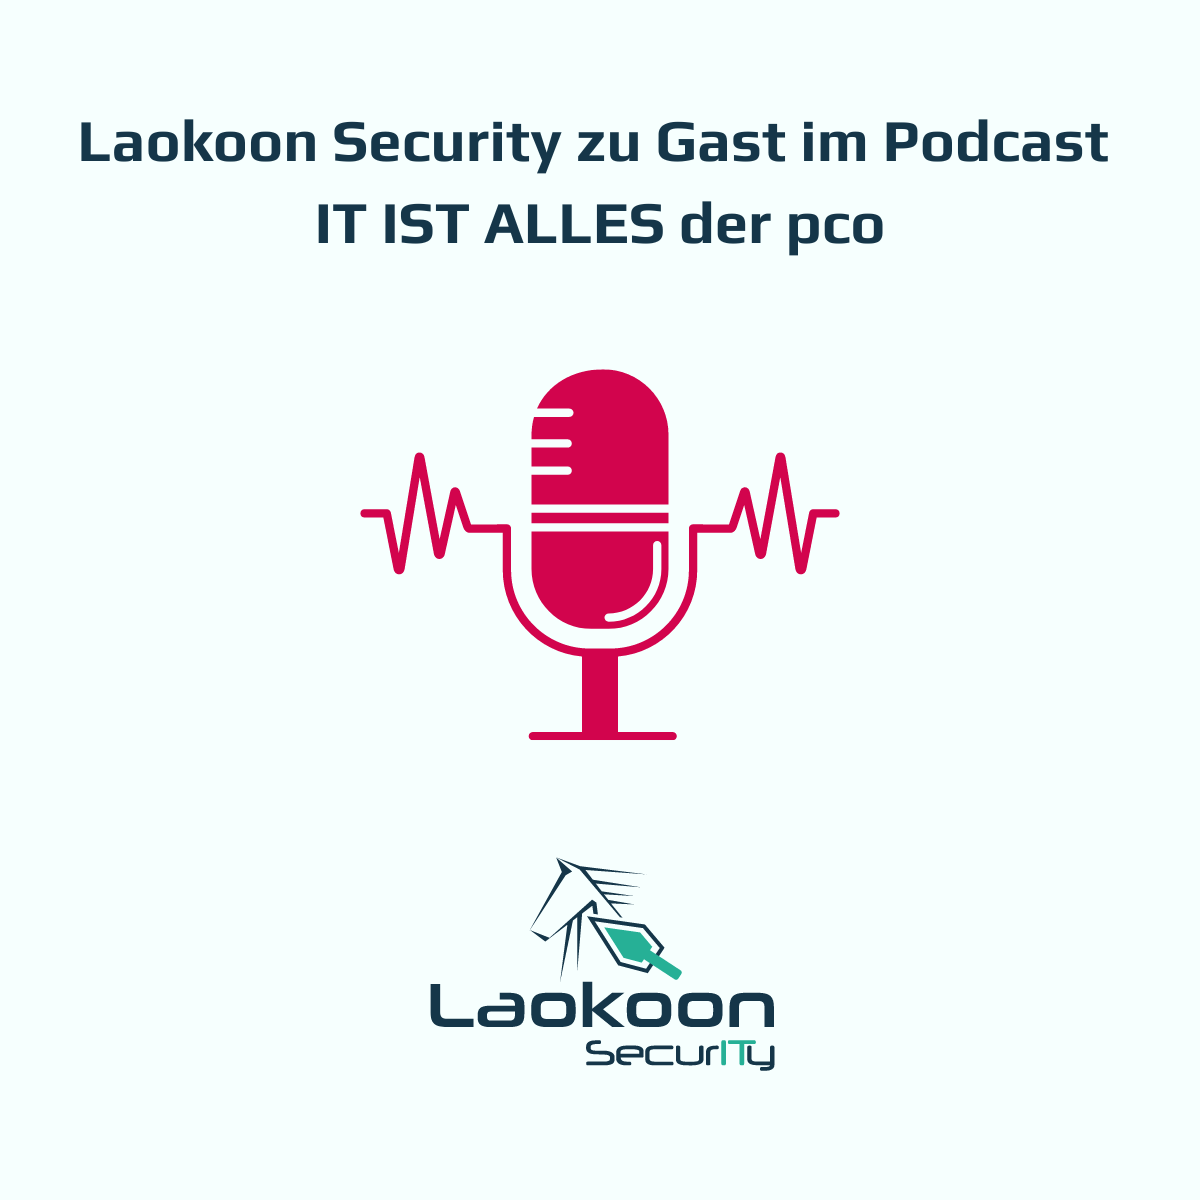 Laokoon Security in the IT IST ALLES Podcast